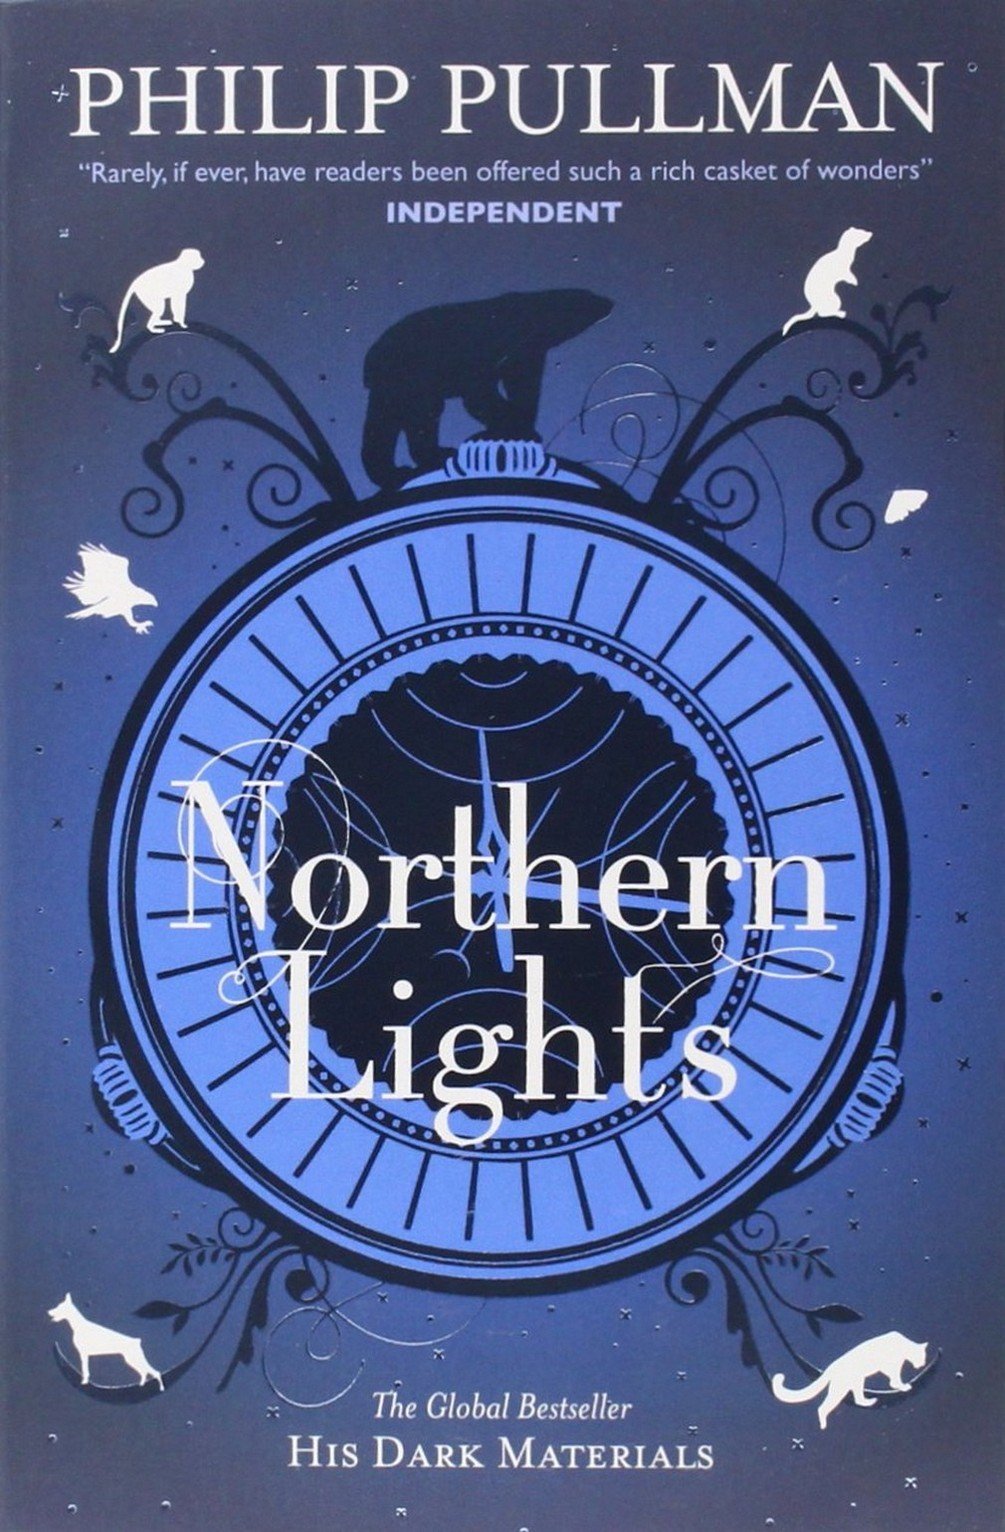 Northern Lights by Philip Pullman (Source: Amazon)